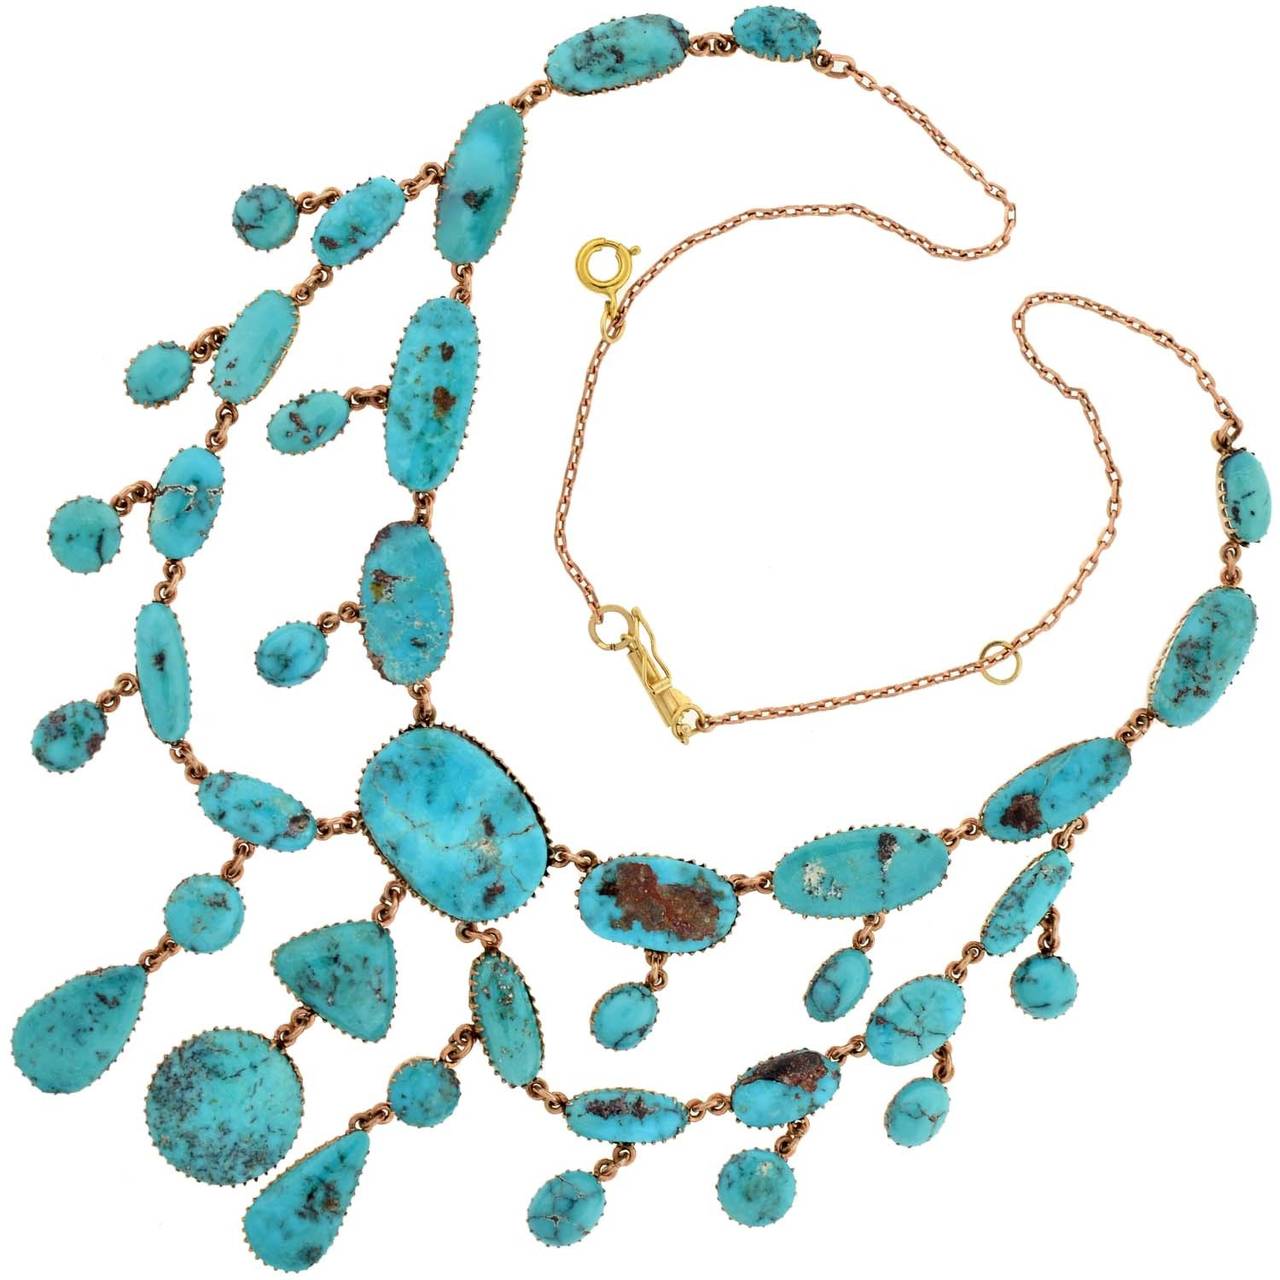 A beautiful turquoise necklace from the Victorian (ca1880) era! This lovely and feminine piece is set in 15kt rosy yellow gold and comprised of 39 vibrant turquoise stones of various sizes and shapes. Eleven stones line the neck of the piece and 28